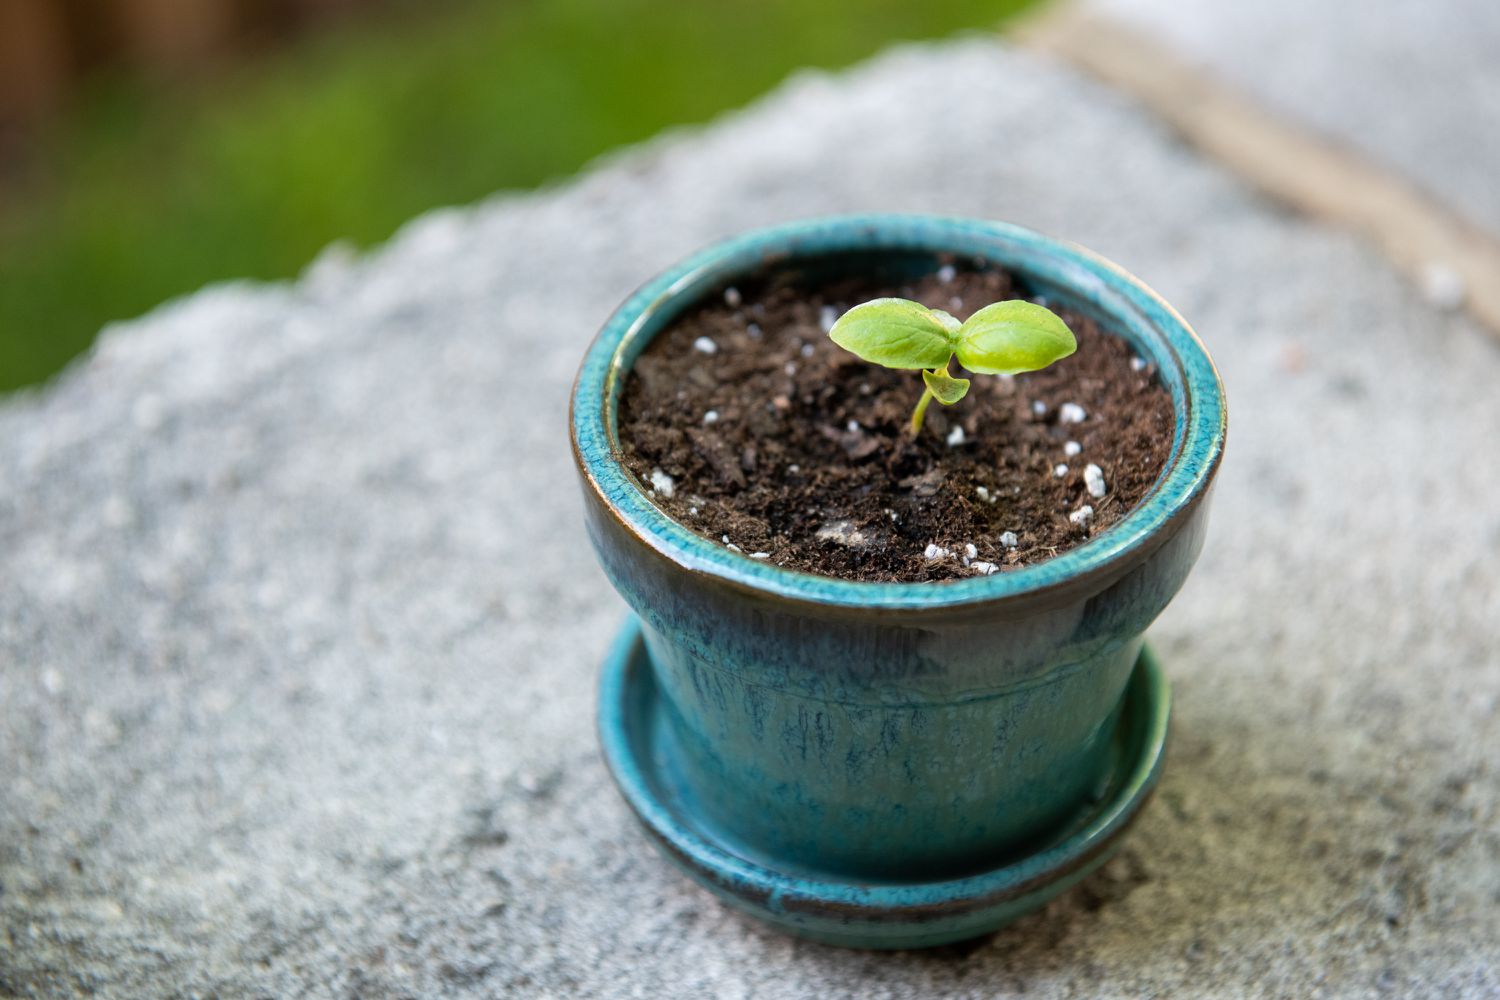 When To Replant Basil Seedlings